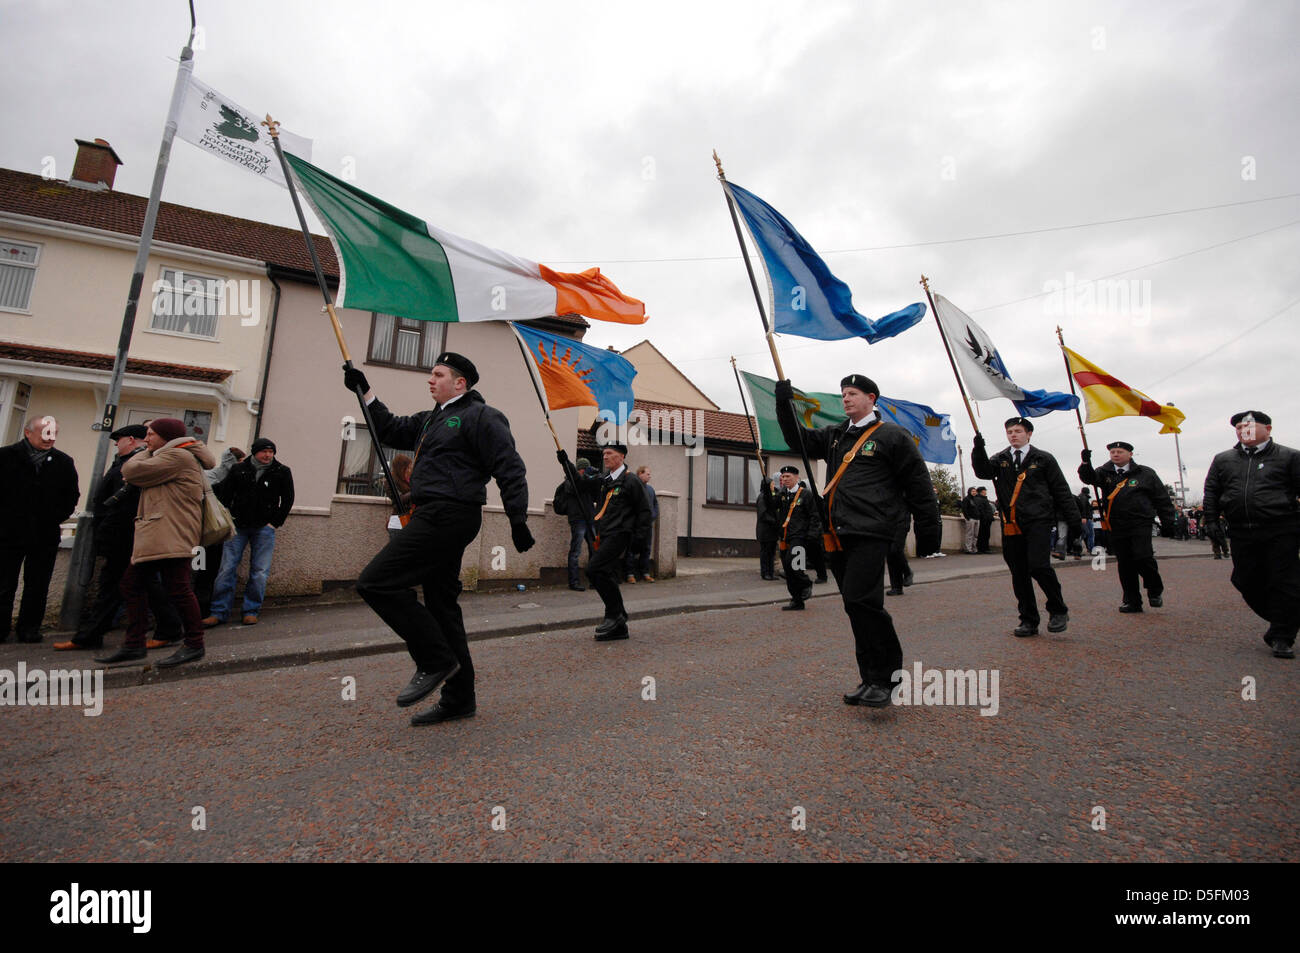 Londonderry, UK. 1st April, 2013. A Colour Party leads a dissident republican 32 County Sovereignty Movement (32 CSM) march to commemorate the 97th  anniversary of the 1916 Easter Rising. Credit: George Sweeney/Alamy Live News Stock Photo